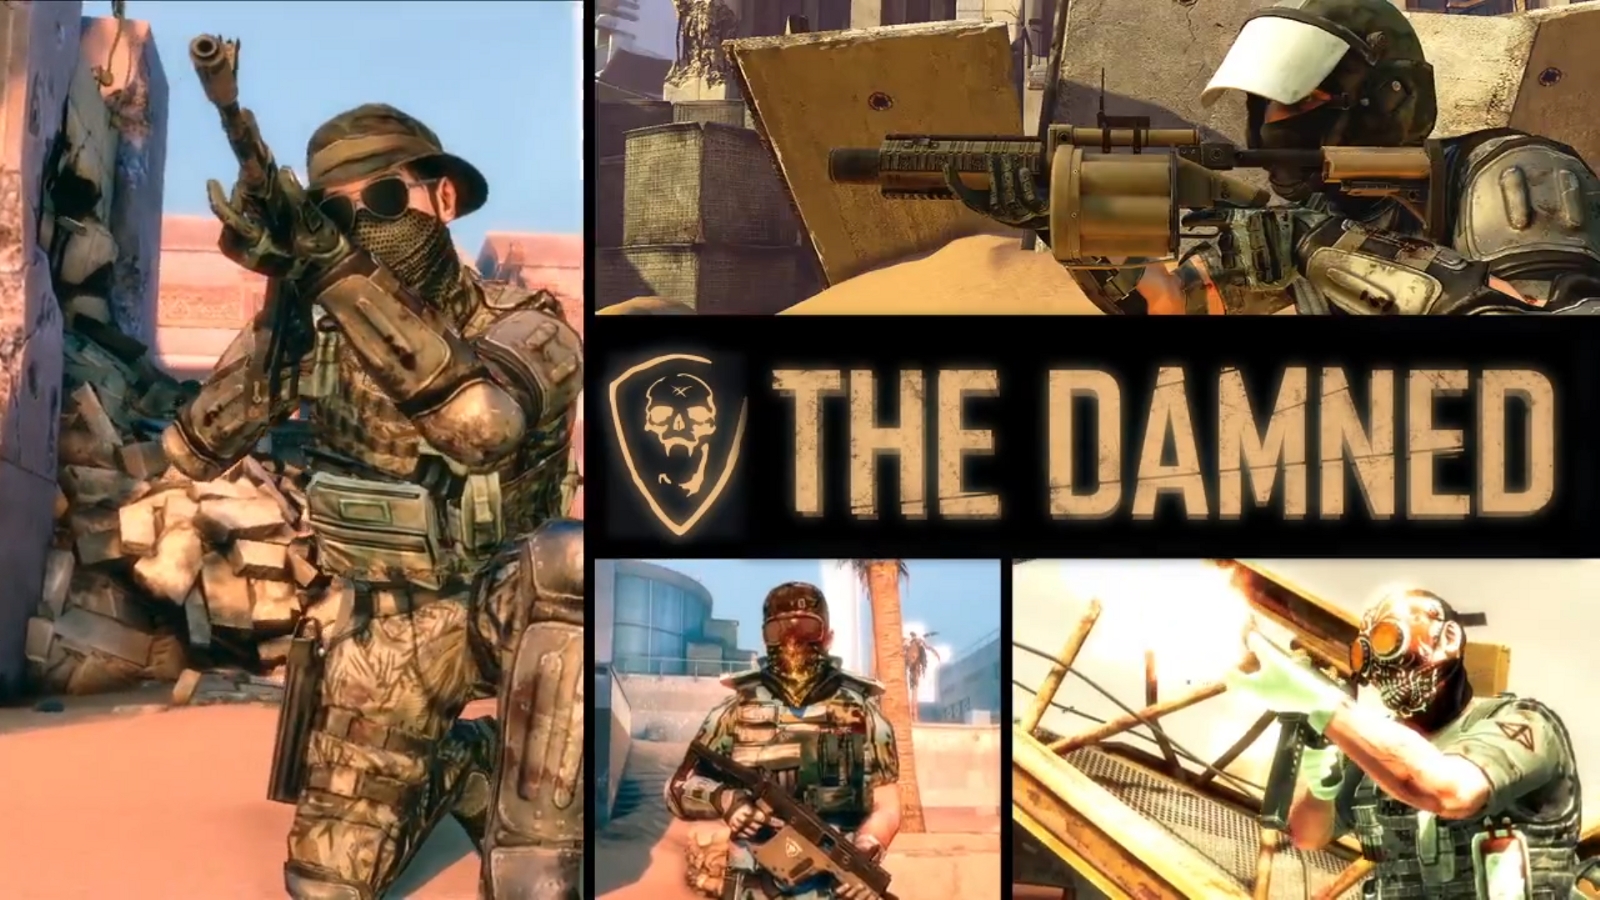 Spec Ops Launches Site And Multiplayer Trailer - Spec Ops The Line The Damned , HD Wallpaper & Backgrounds